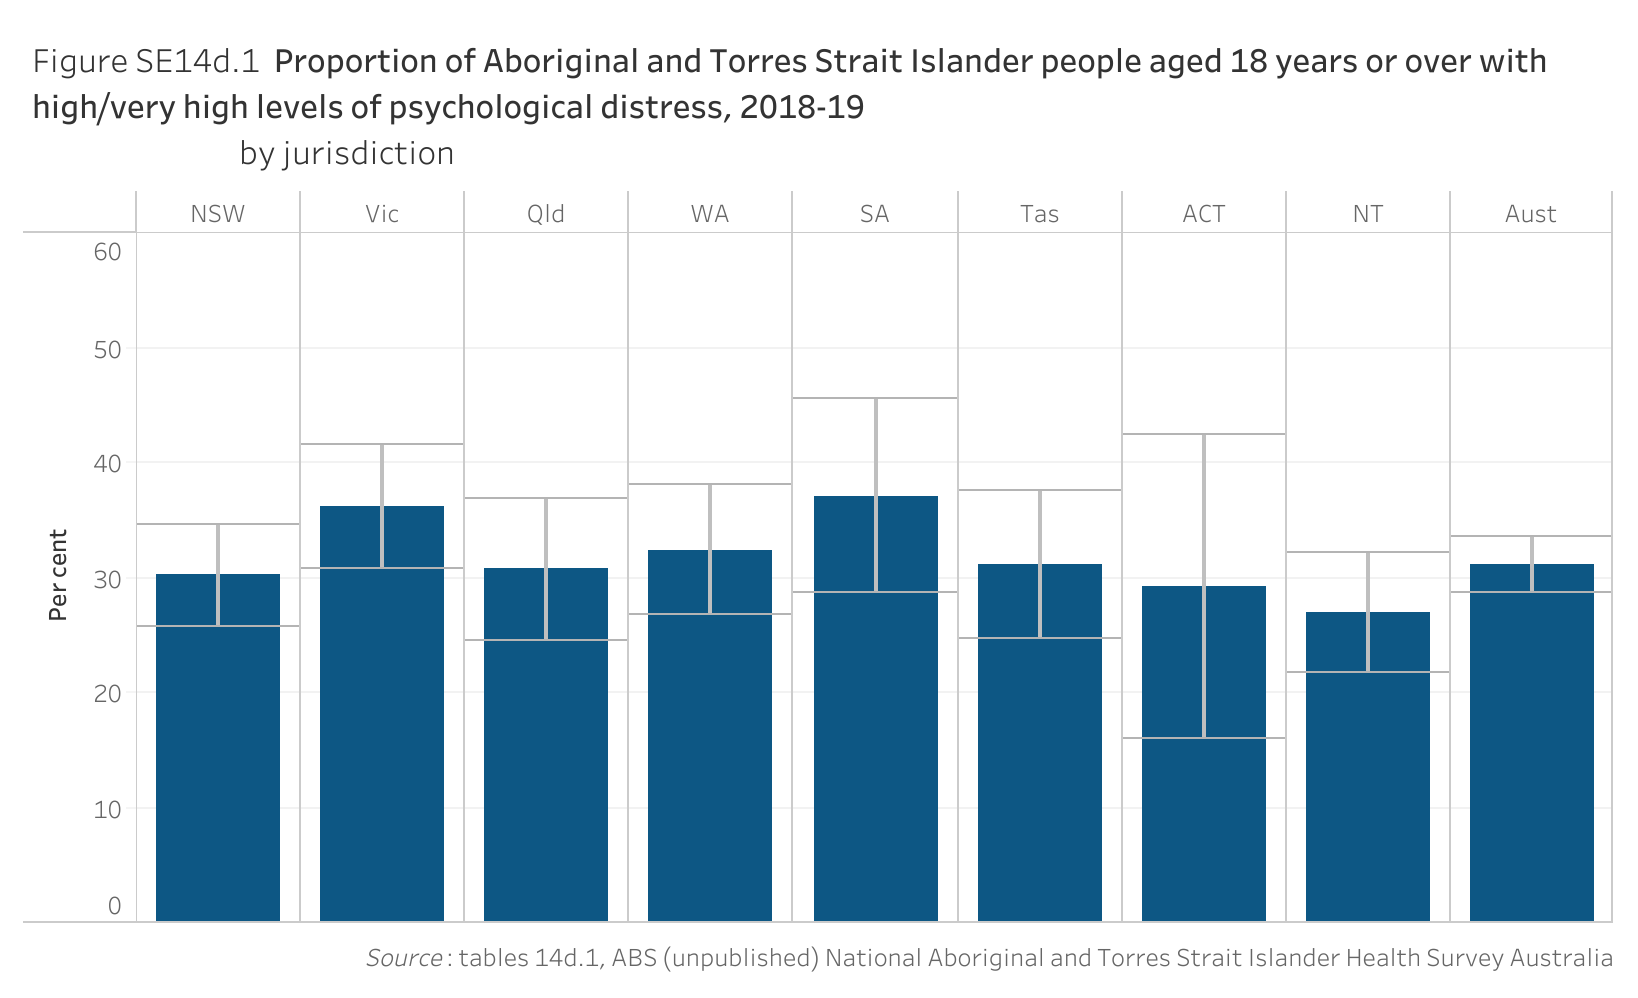 Figure SE14d.1 shows the proportion of Aboriginal and Torres Strait Islander people aged 18 years or over with high/very high levels of psychological distress, 2018-19, by jurisdiction. More details can be found within the text near this image.